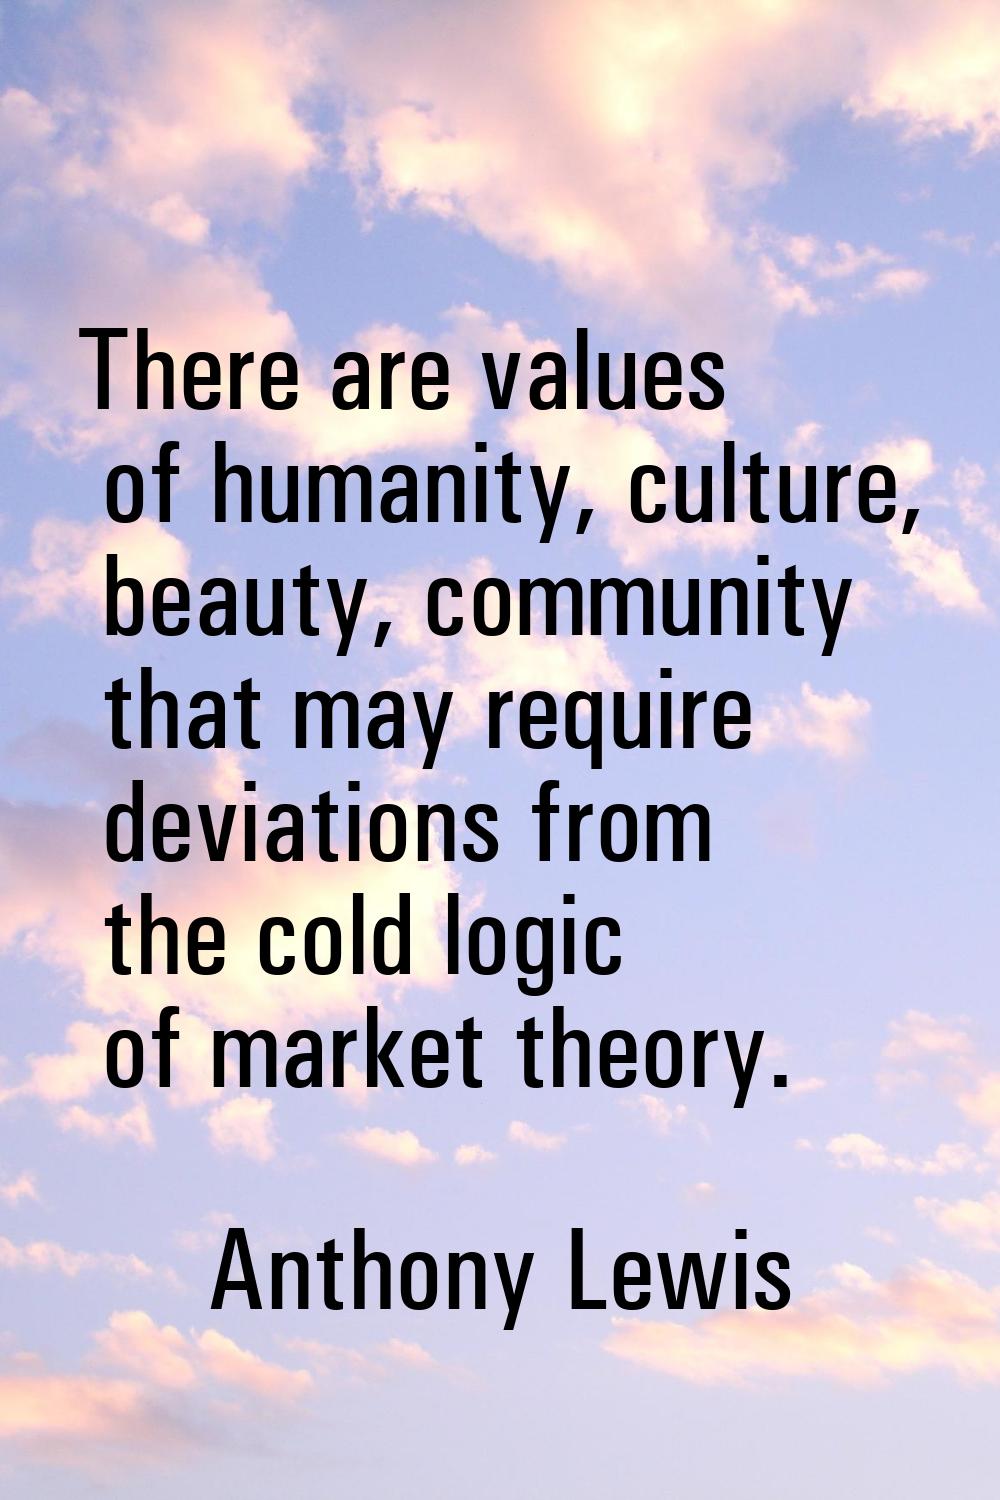 There are values of humanity, culture, beauty, community that may require deviations from the cold 